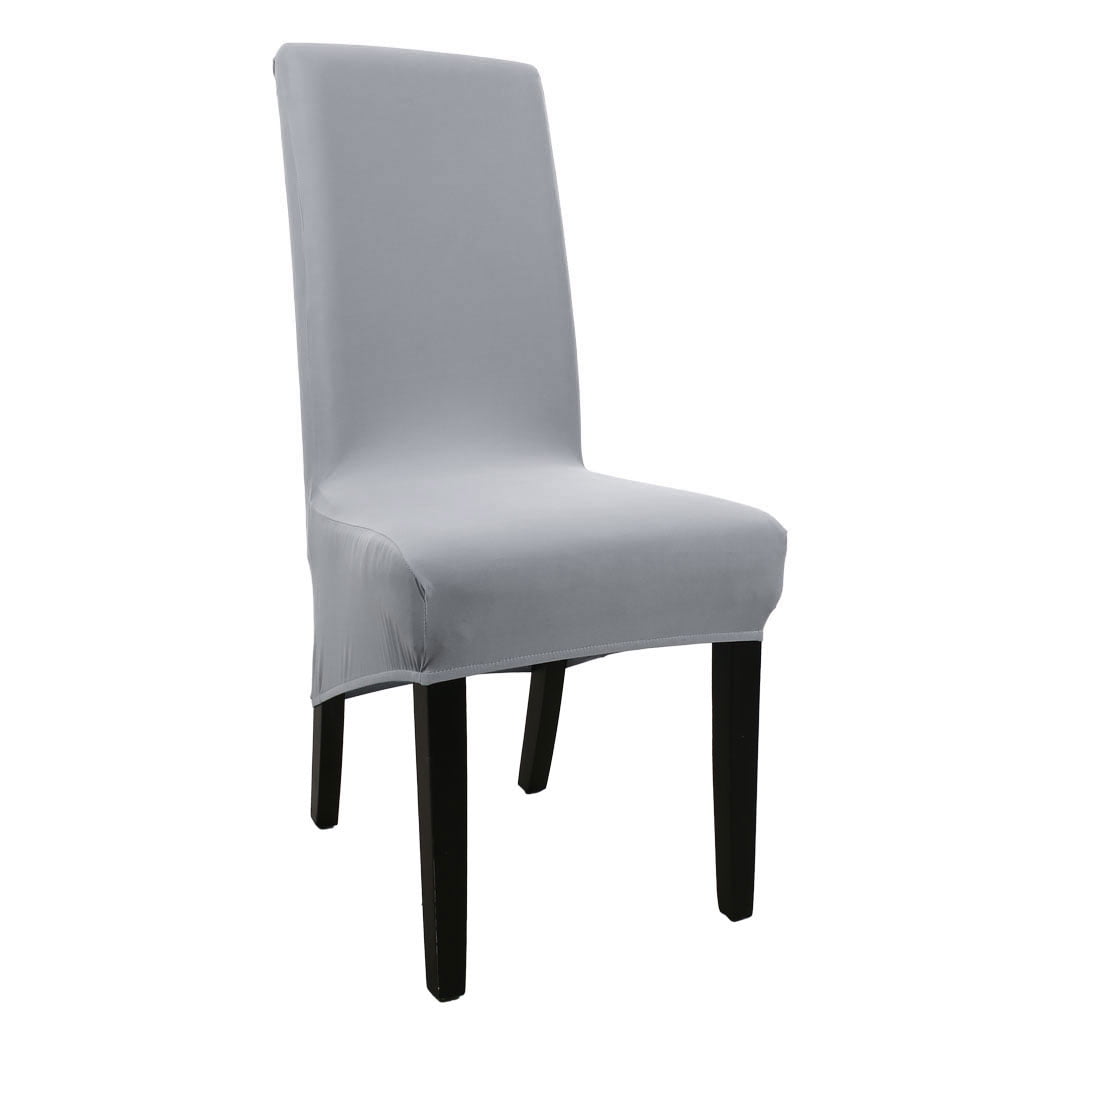 Dining Chair Seat Cover Light Gray, Seat Covers For Long Back Dining Chairs